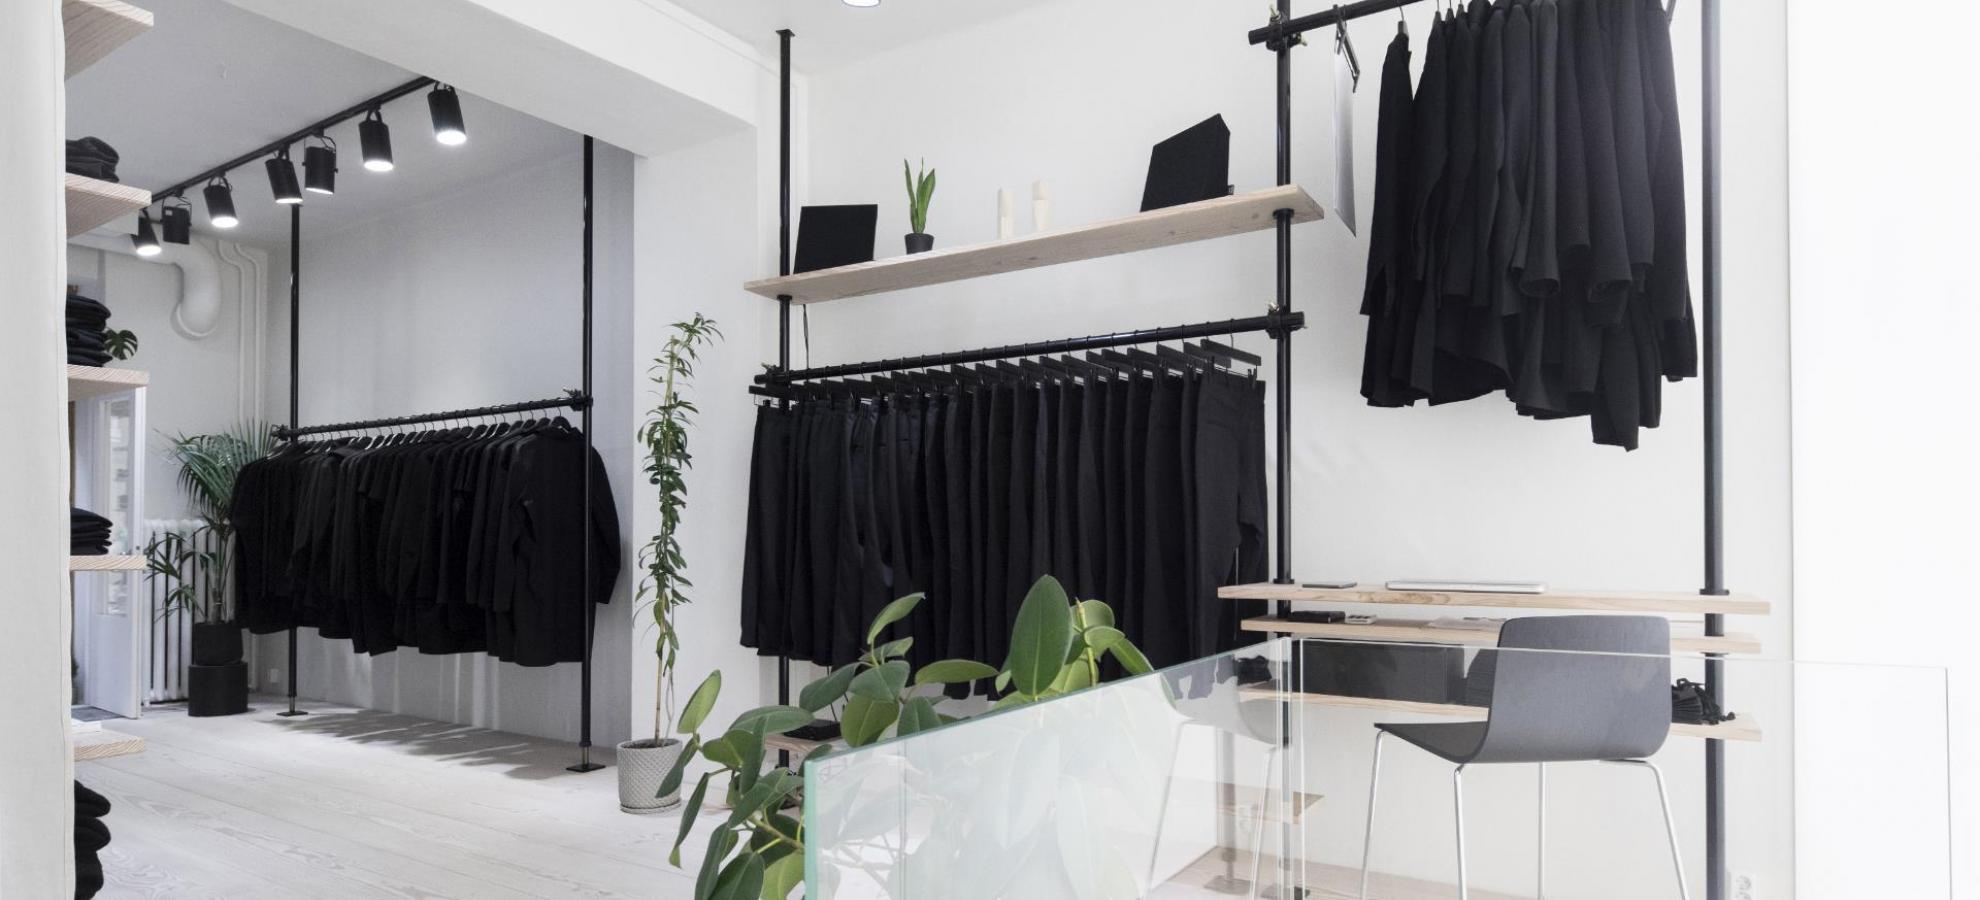 In a brilliant white store interior, a series of three black clothes on racks against the far wall are filled with various black clothing.